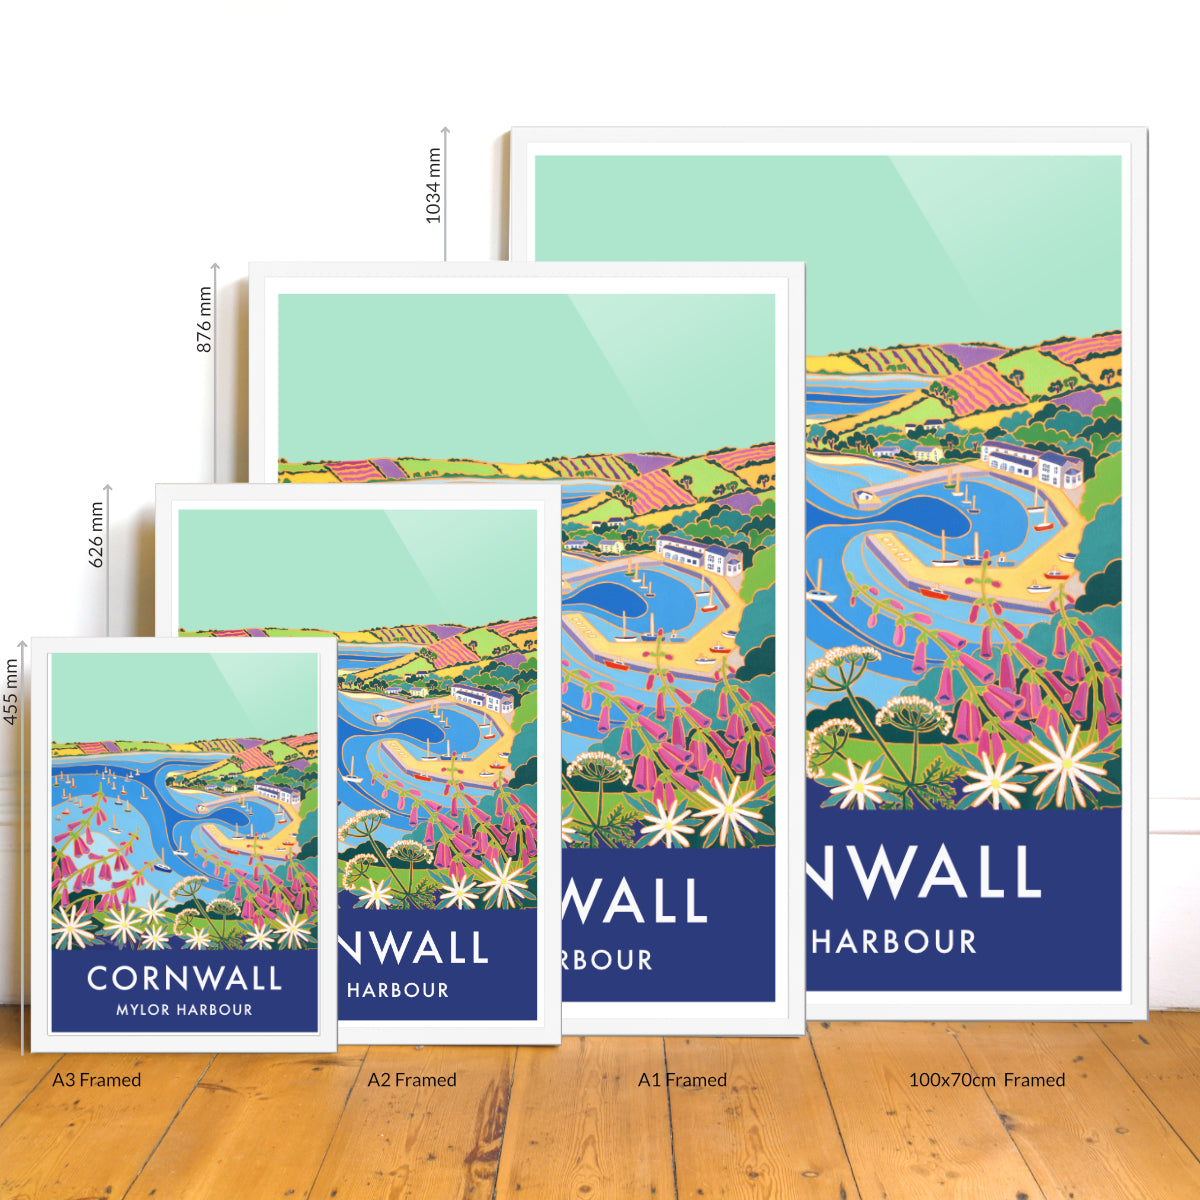 Mylor Harbour Art Prints of Cornwall by Cornish Artist Joanne Short. Cornwall Art Gallery, Vintage Style Poster Art for Homes